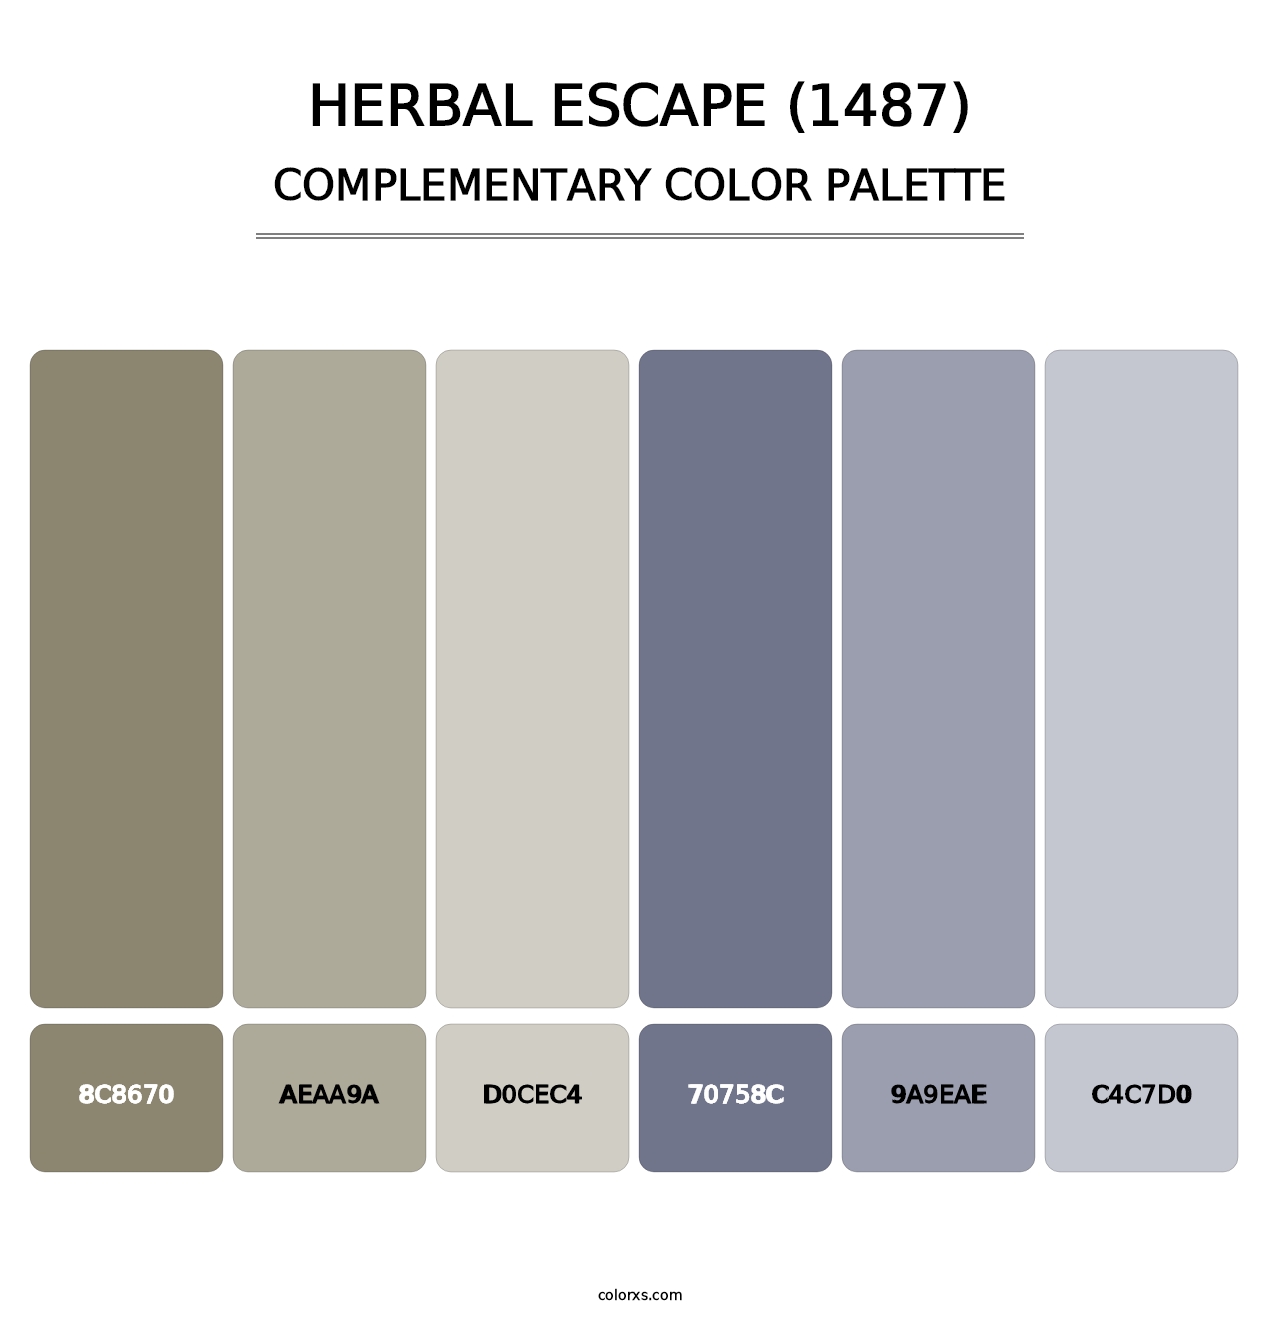 Herbal Escape (1487) - Complementary Color Palette